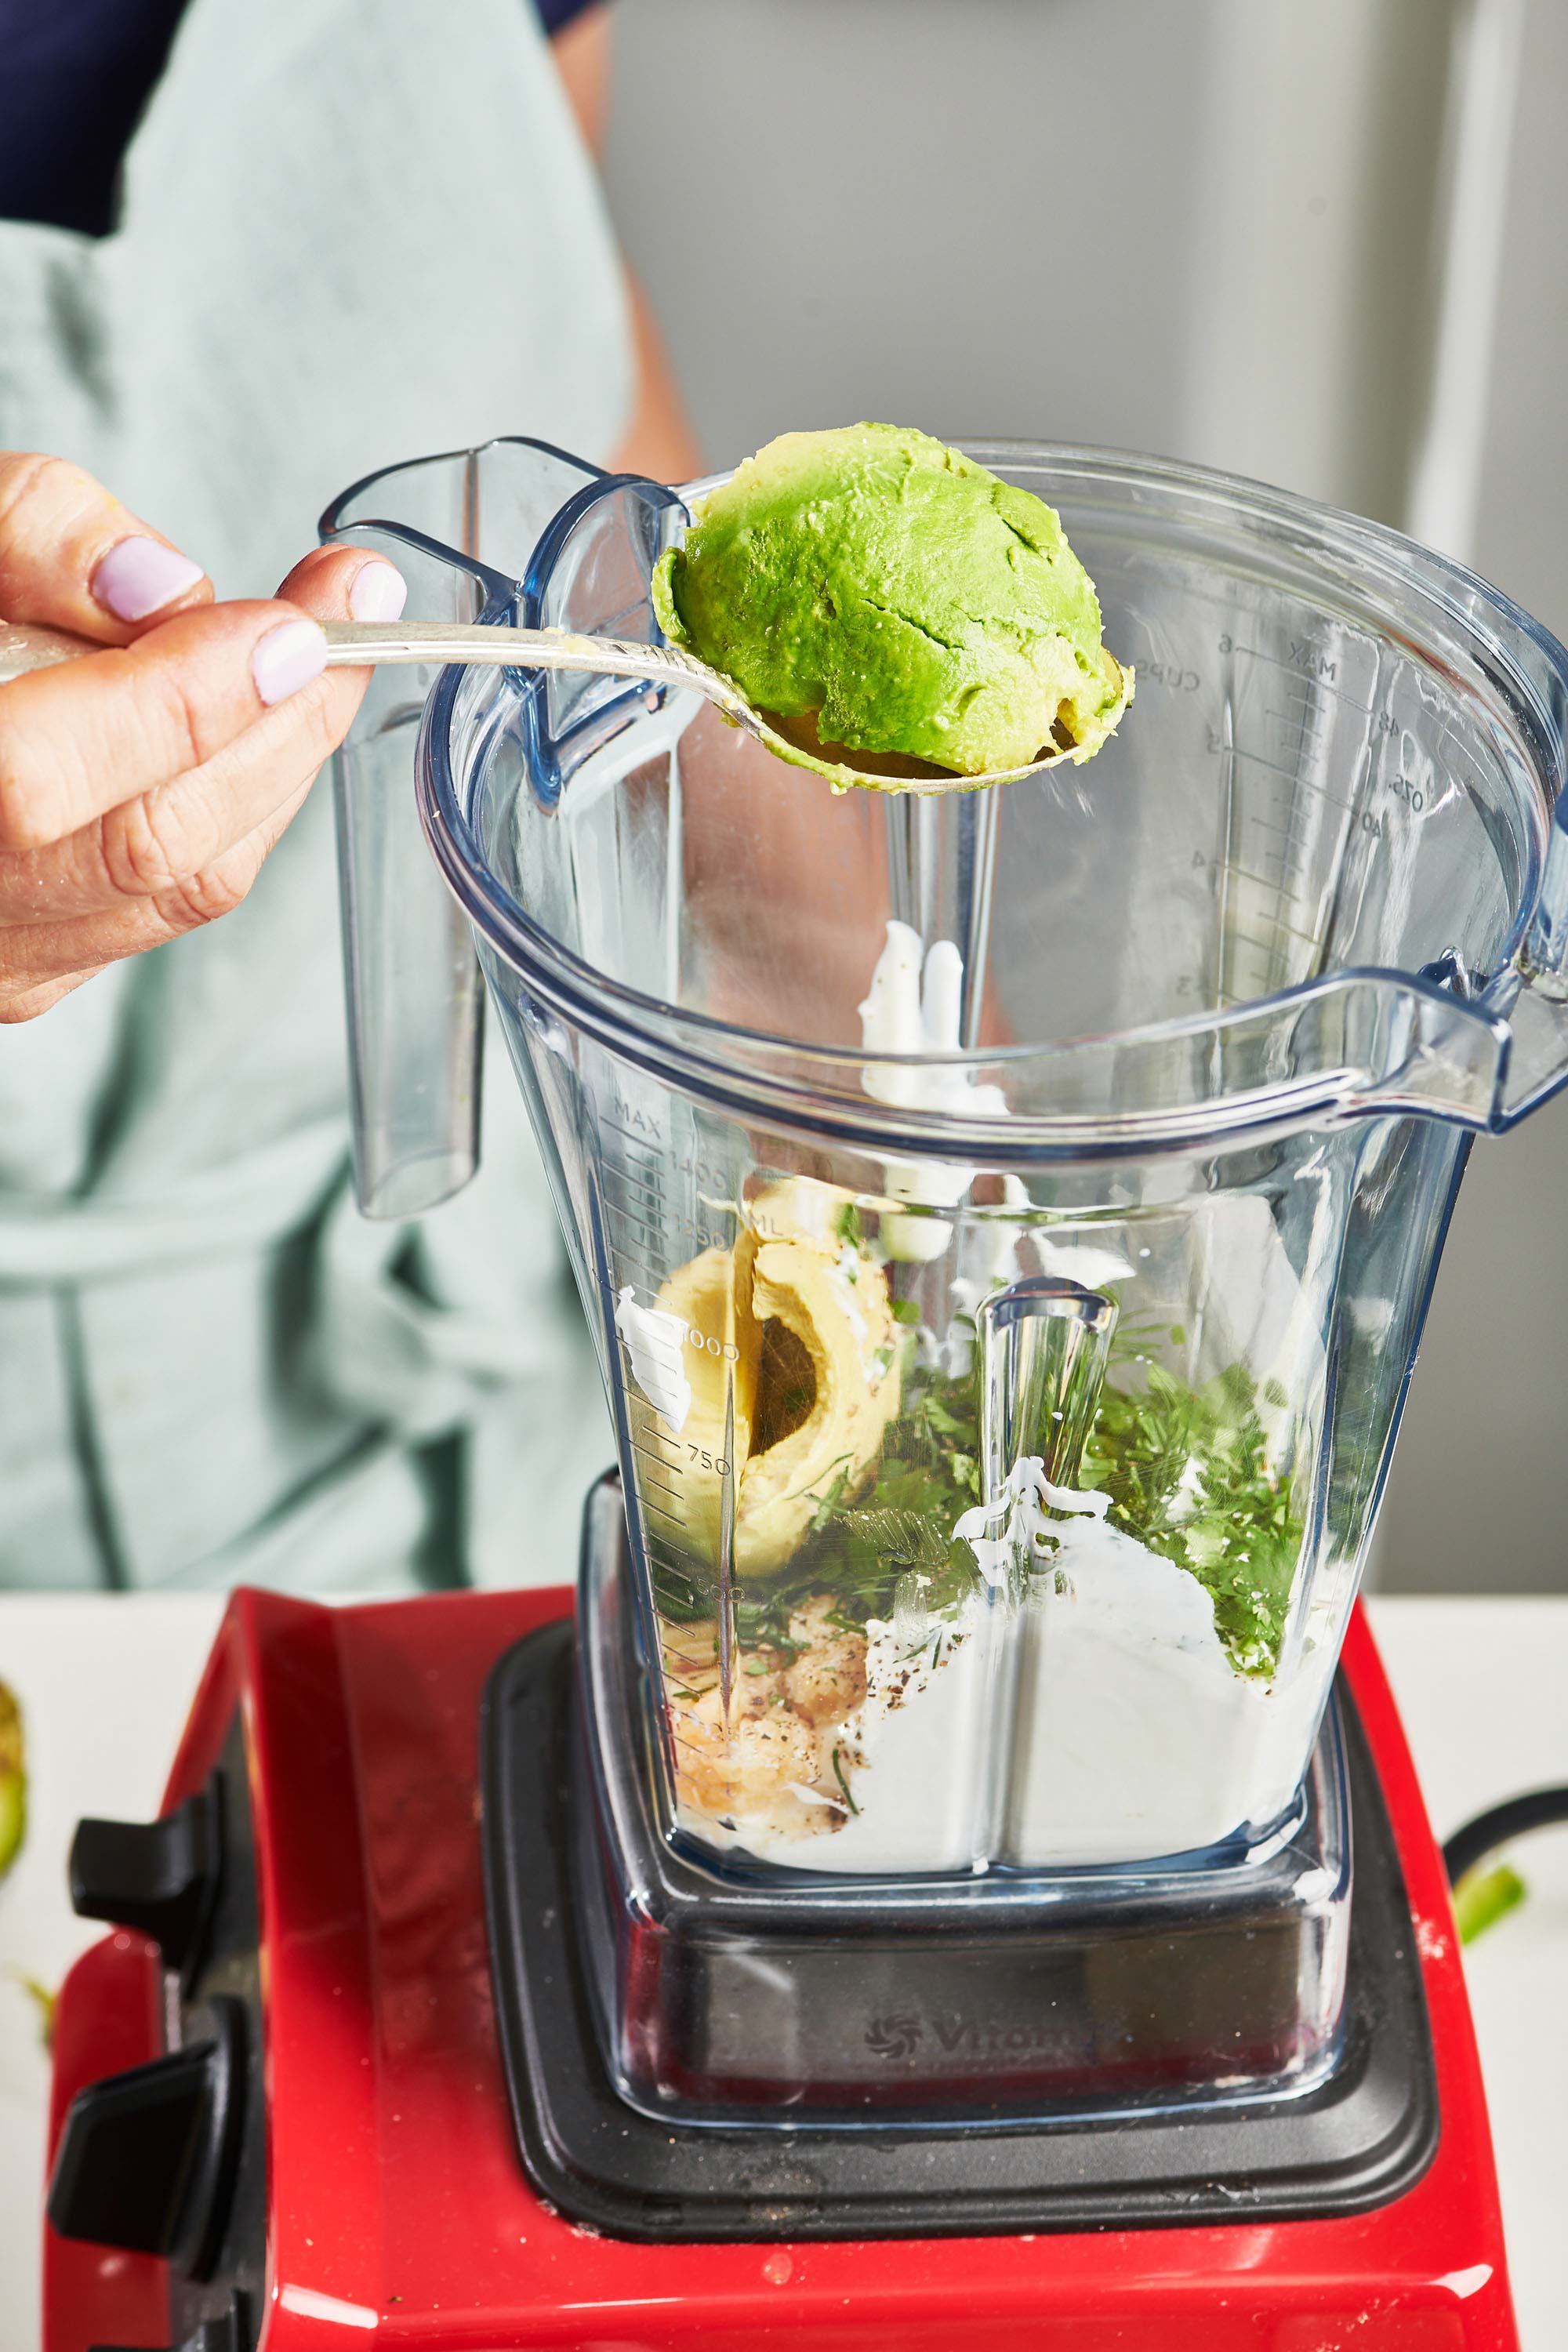 Woman holding avocado on a spoon over a blender.